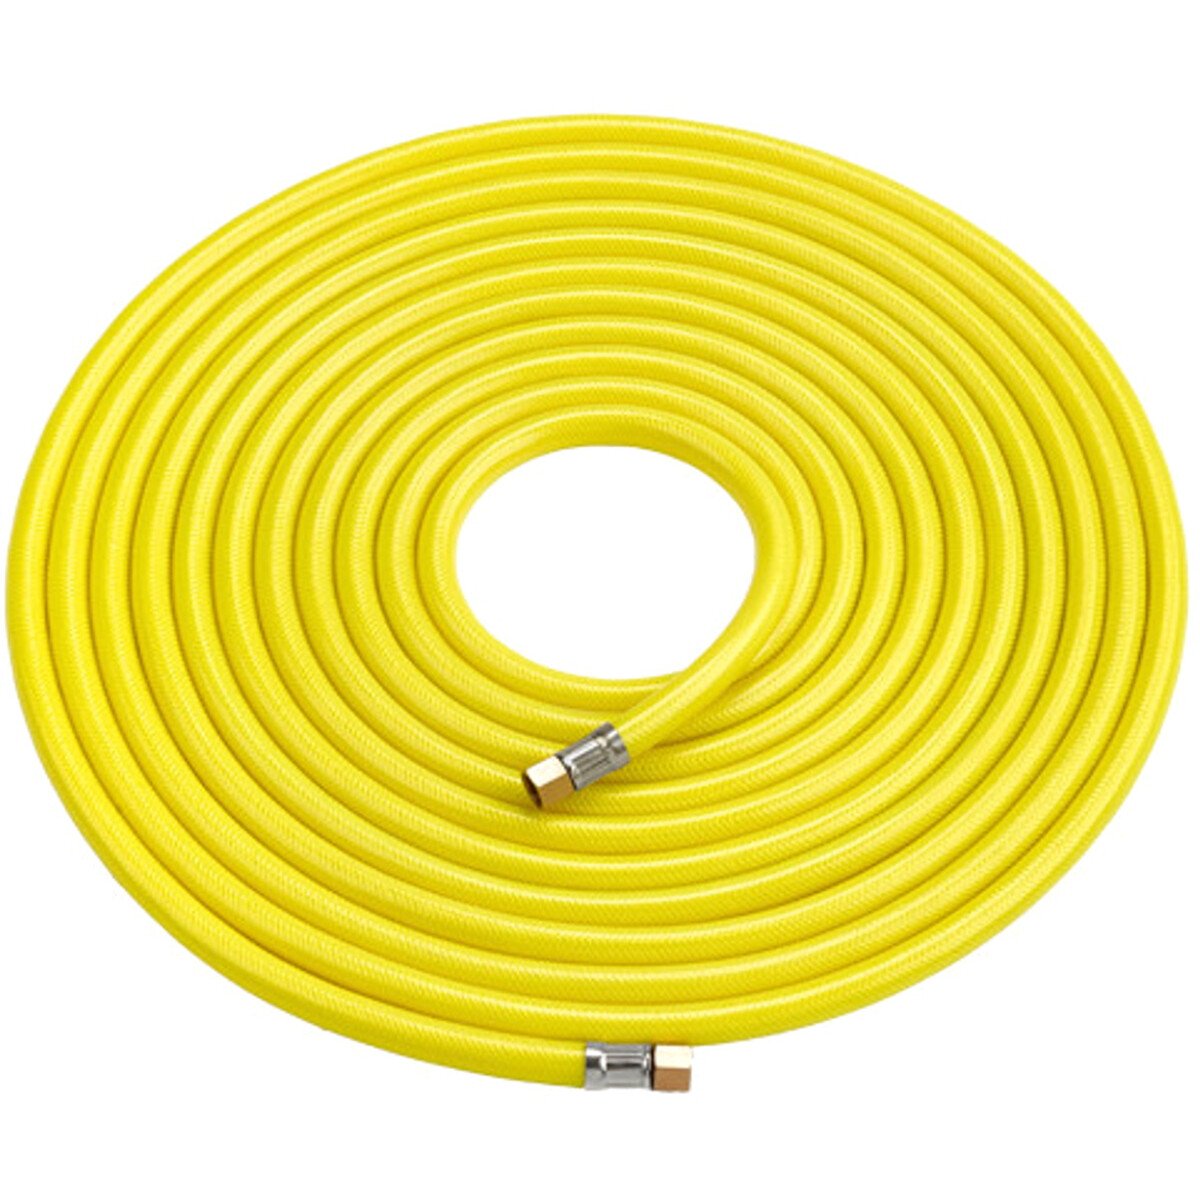 Clarke HVY15 Hi-Vis Airline Hose Yellow 15m (with ¼" BSP swivel nuts) 3122015